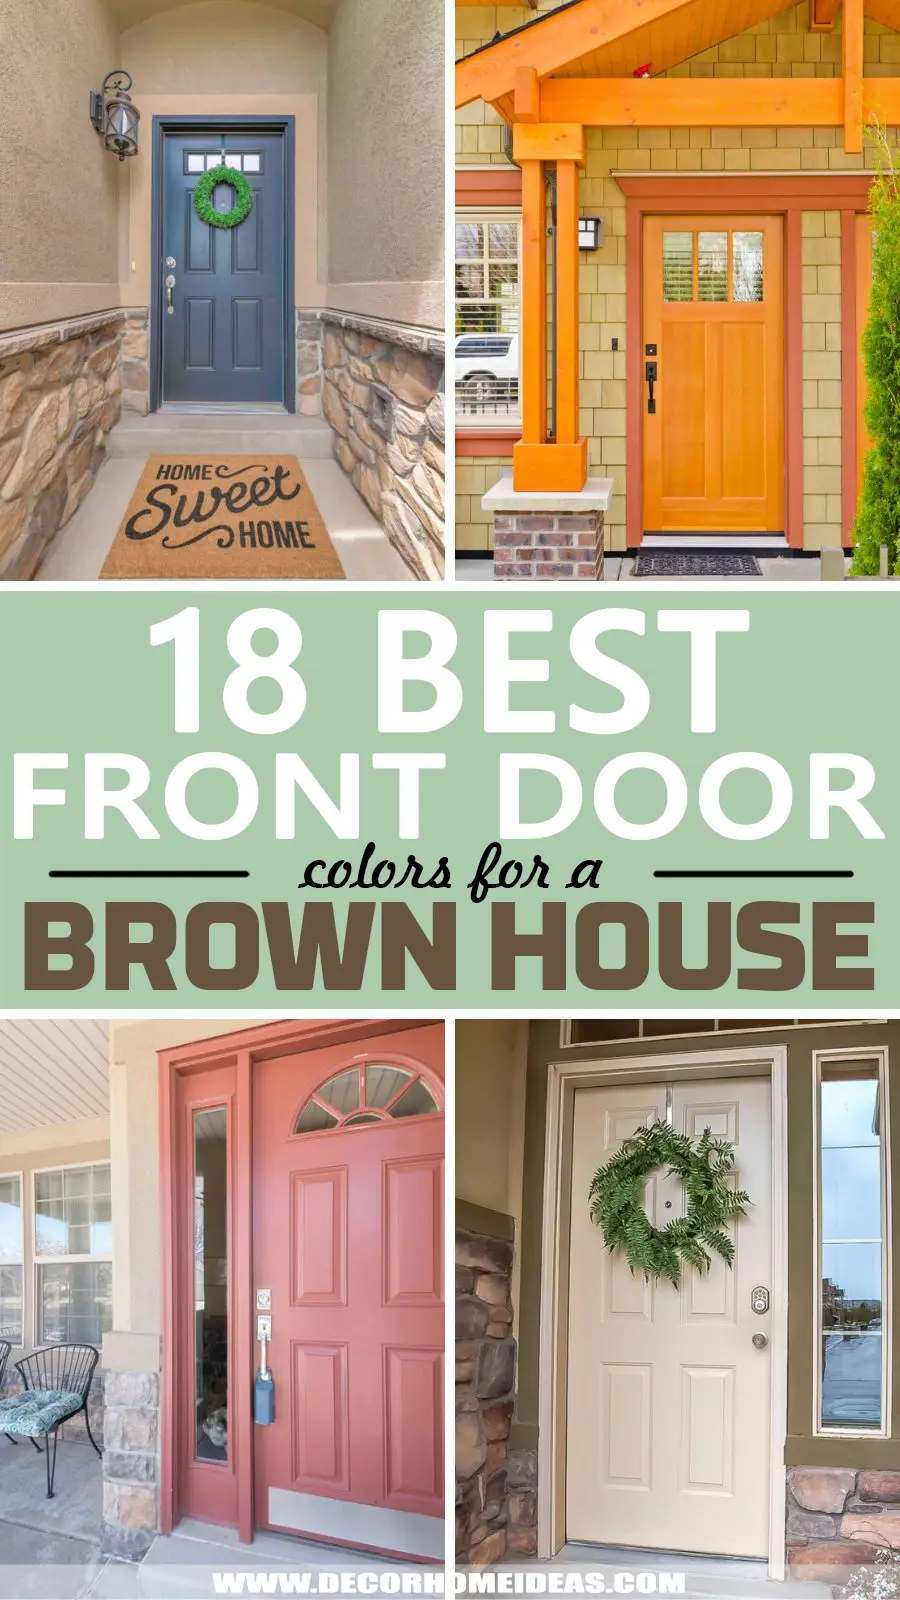 Best Front Door Colors For a Brown House. Add some cheerful color to your brown house with these awesome front door colors. Consider repainting your front door for a more sophisticated and appealing look to your home.